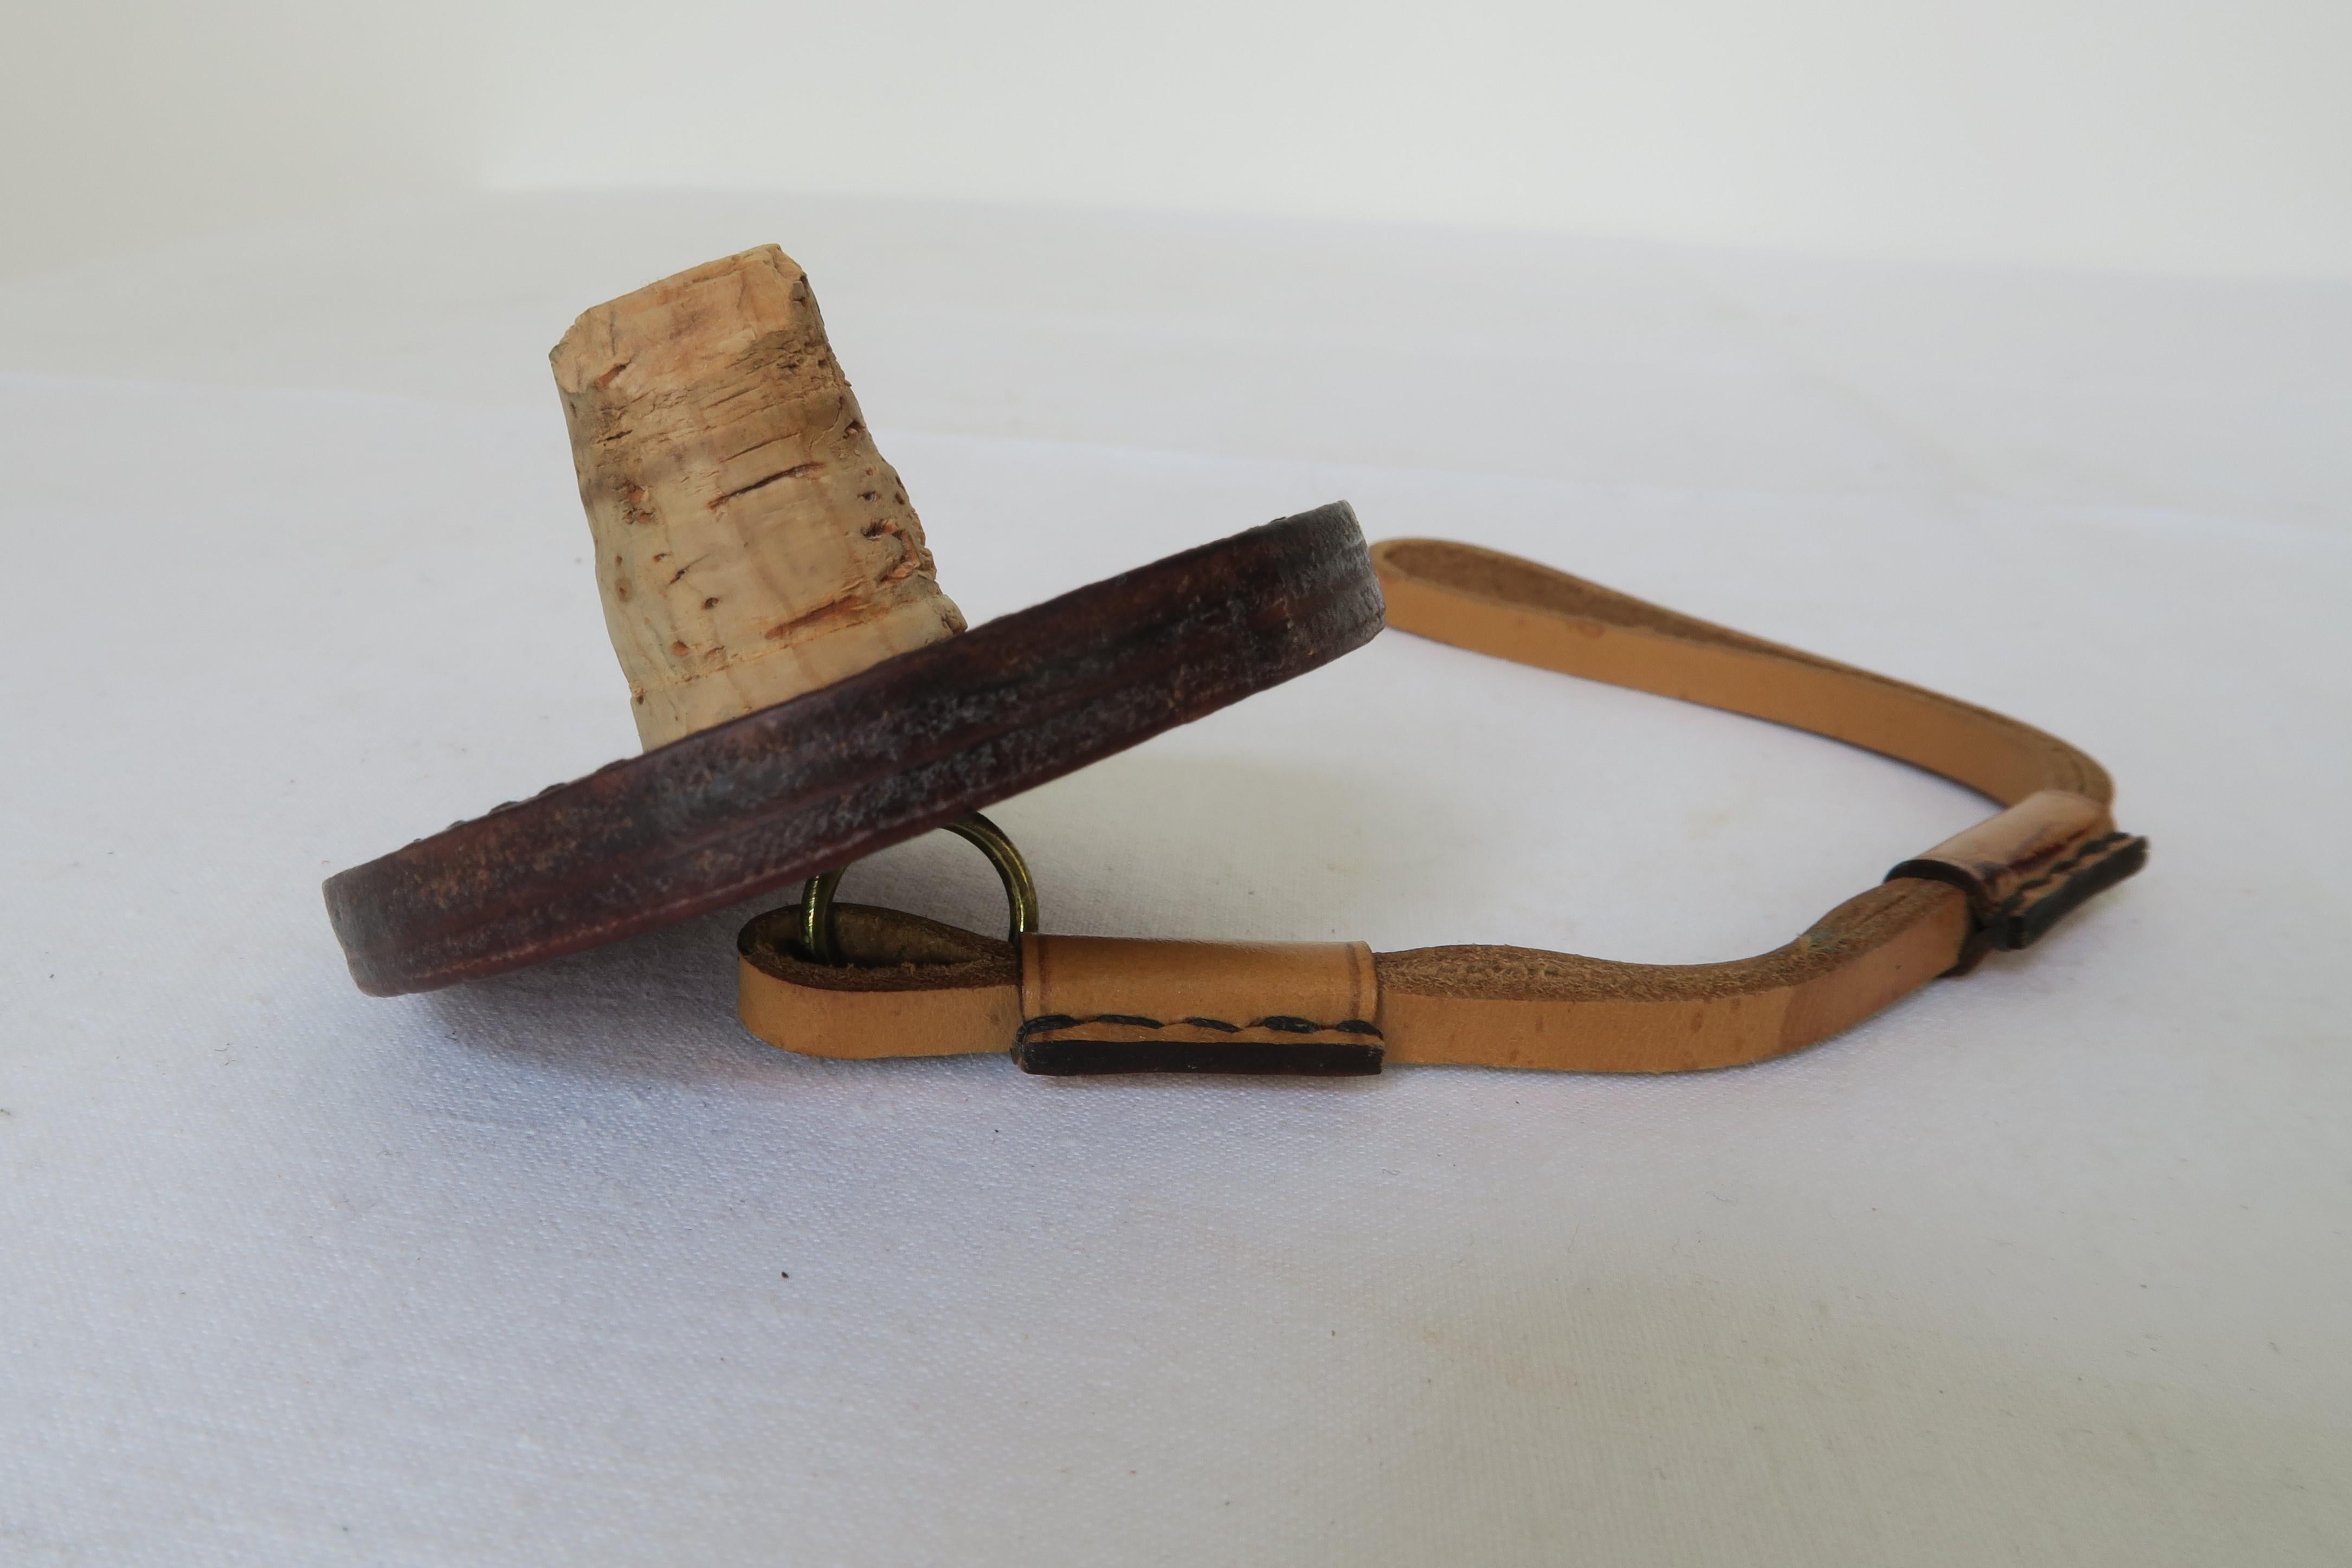 For sale is a unique piece of Mid-Century Modern design. The bottle stopper was carefully hand crafted out of leather. It has a brass eyelet connecting the round base of the cork to a 21.5cm long leather strap. It was produced in the renowned